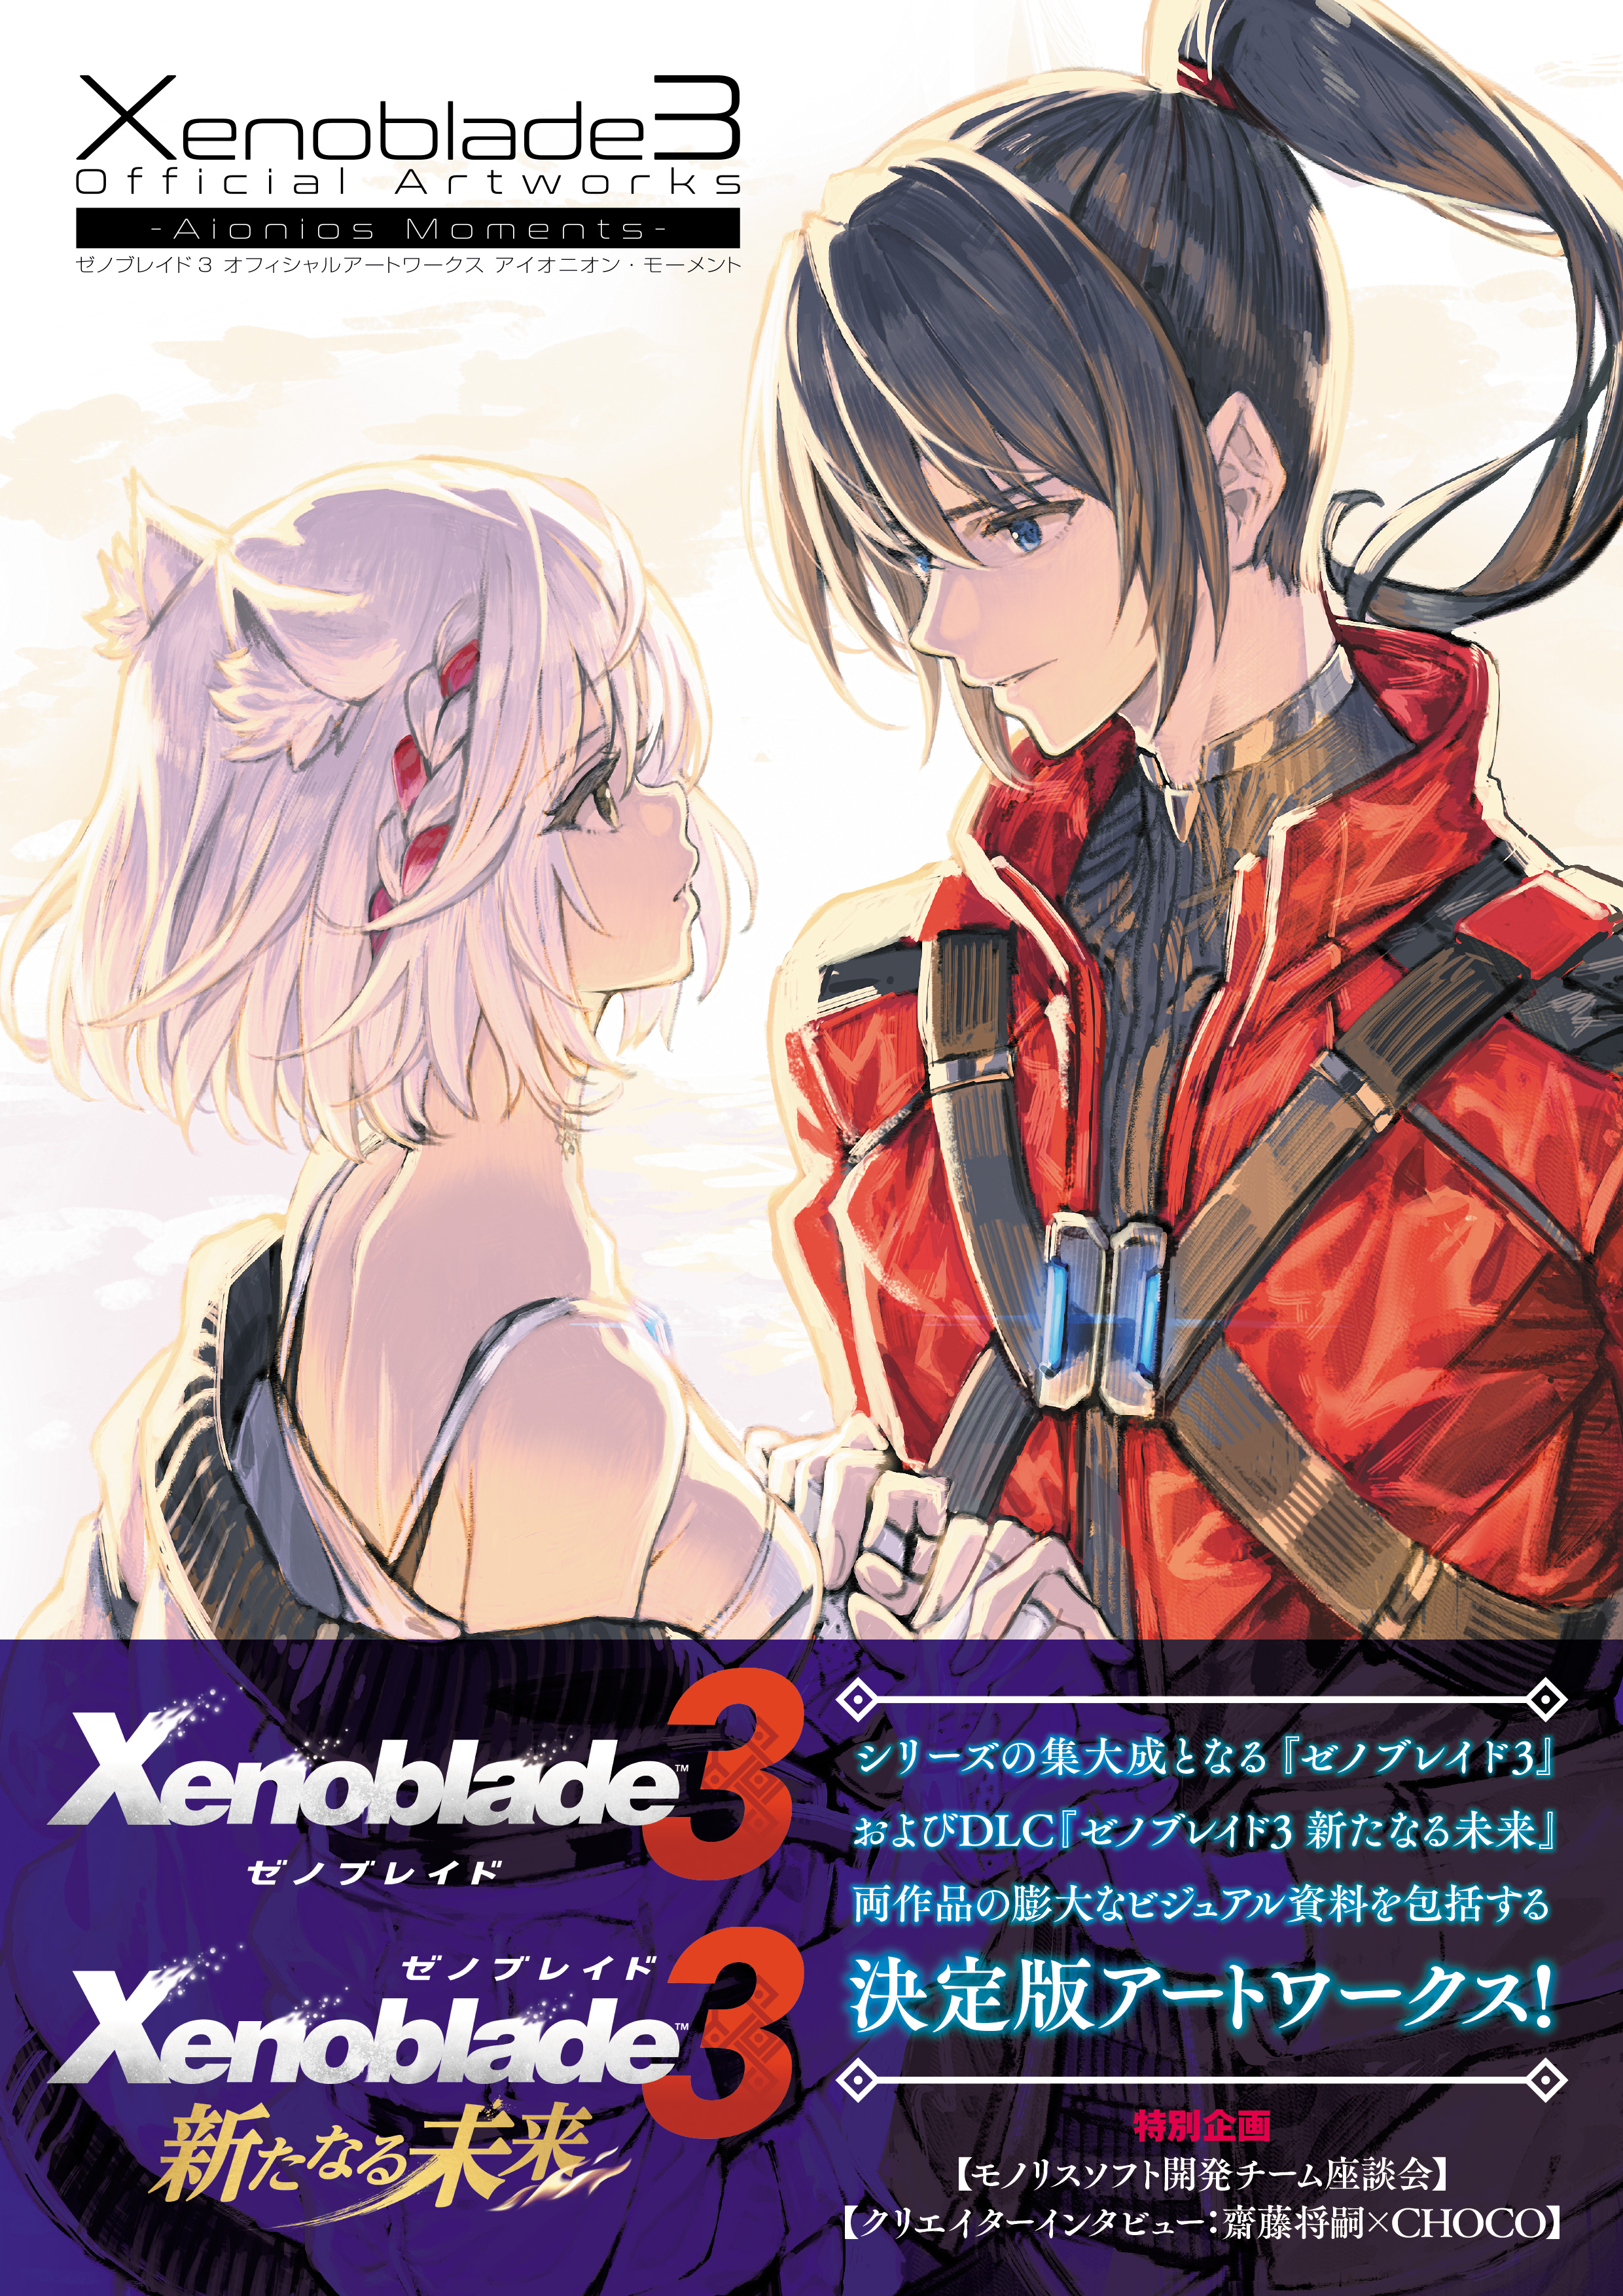 Nintendo Wire on X: An art book for Xenoblade Chronicles 3 has